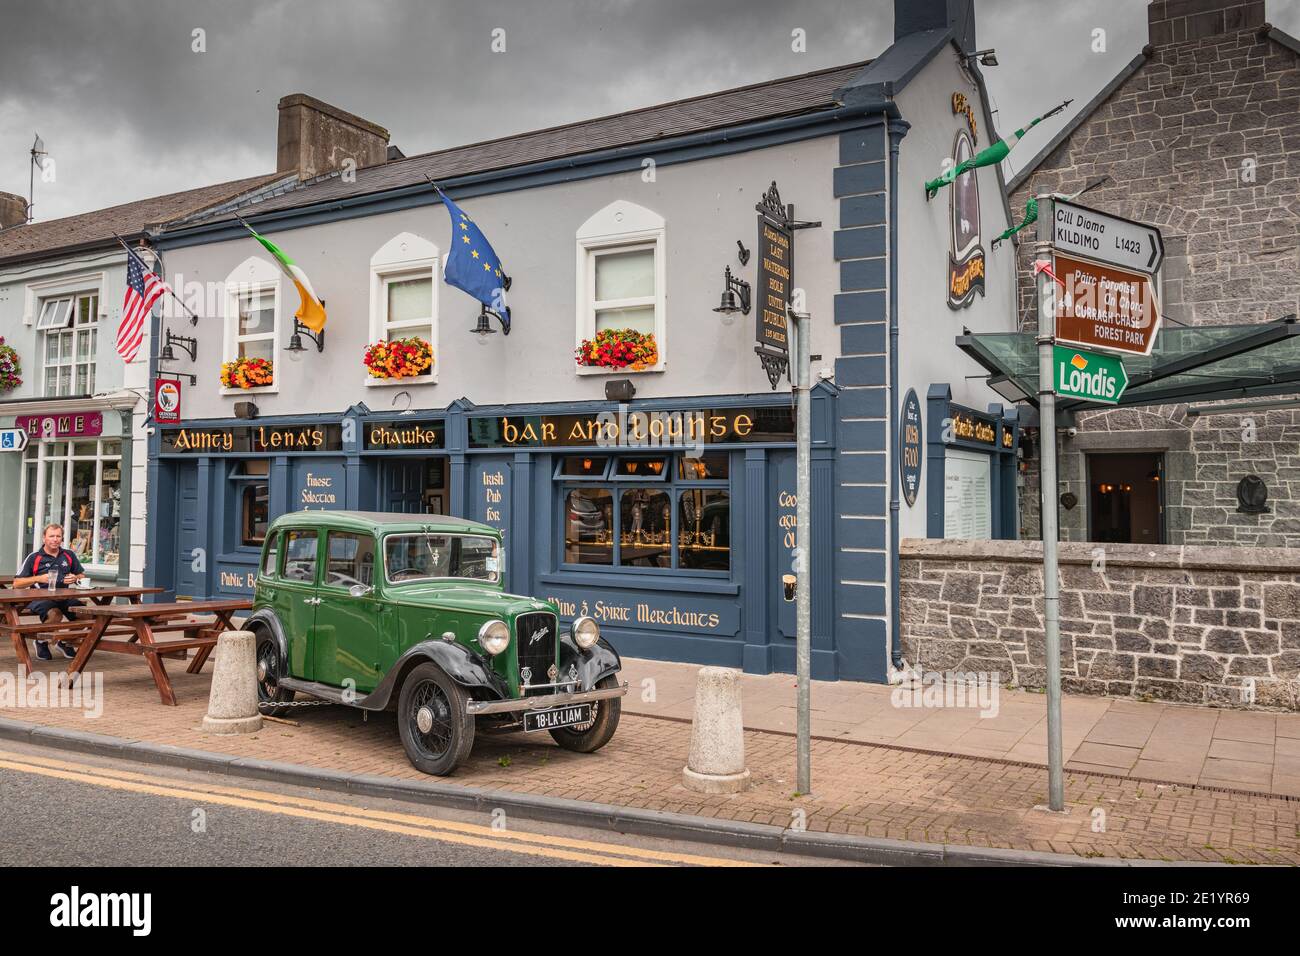 Adare, Limerick, Ireland 07.21.2019 View of a typical Irish pub with the blue facade and vintage car in the town of Adare. Europe Stock Photo